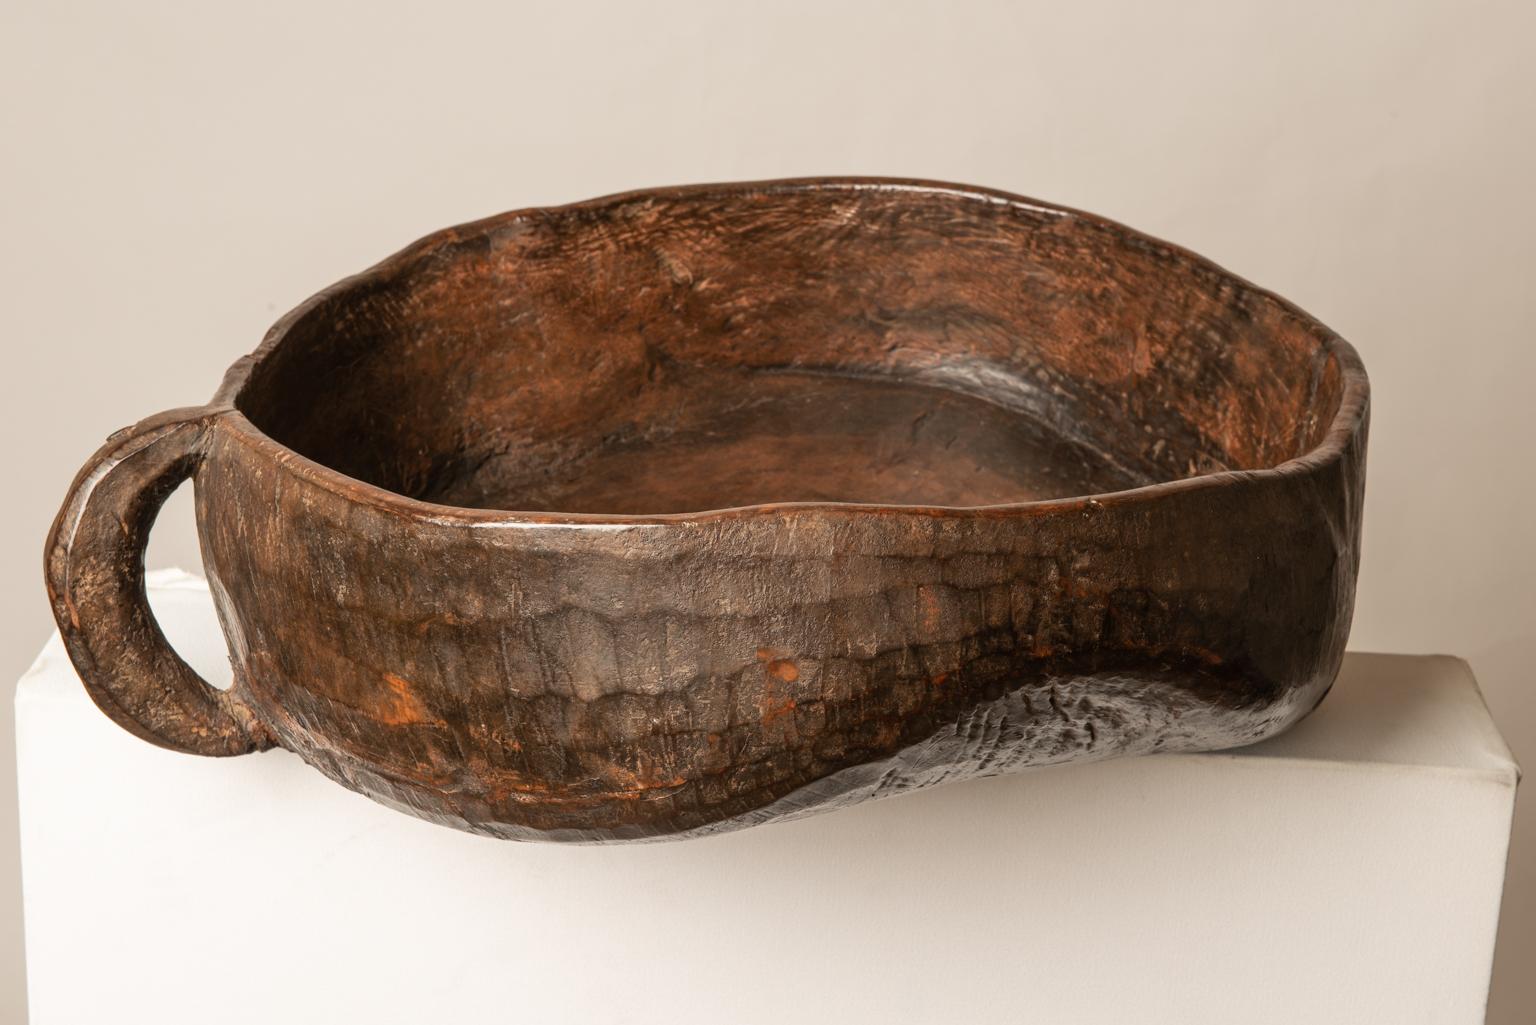 Old wooden bowl from Indonesia, completely dug in a tree trunk.
Useful for newspapers and magazines. On a large table for fruits -
With a cushion may be the favorite place for a little dog or a cat.
O/1027.